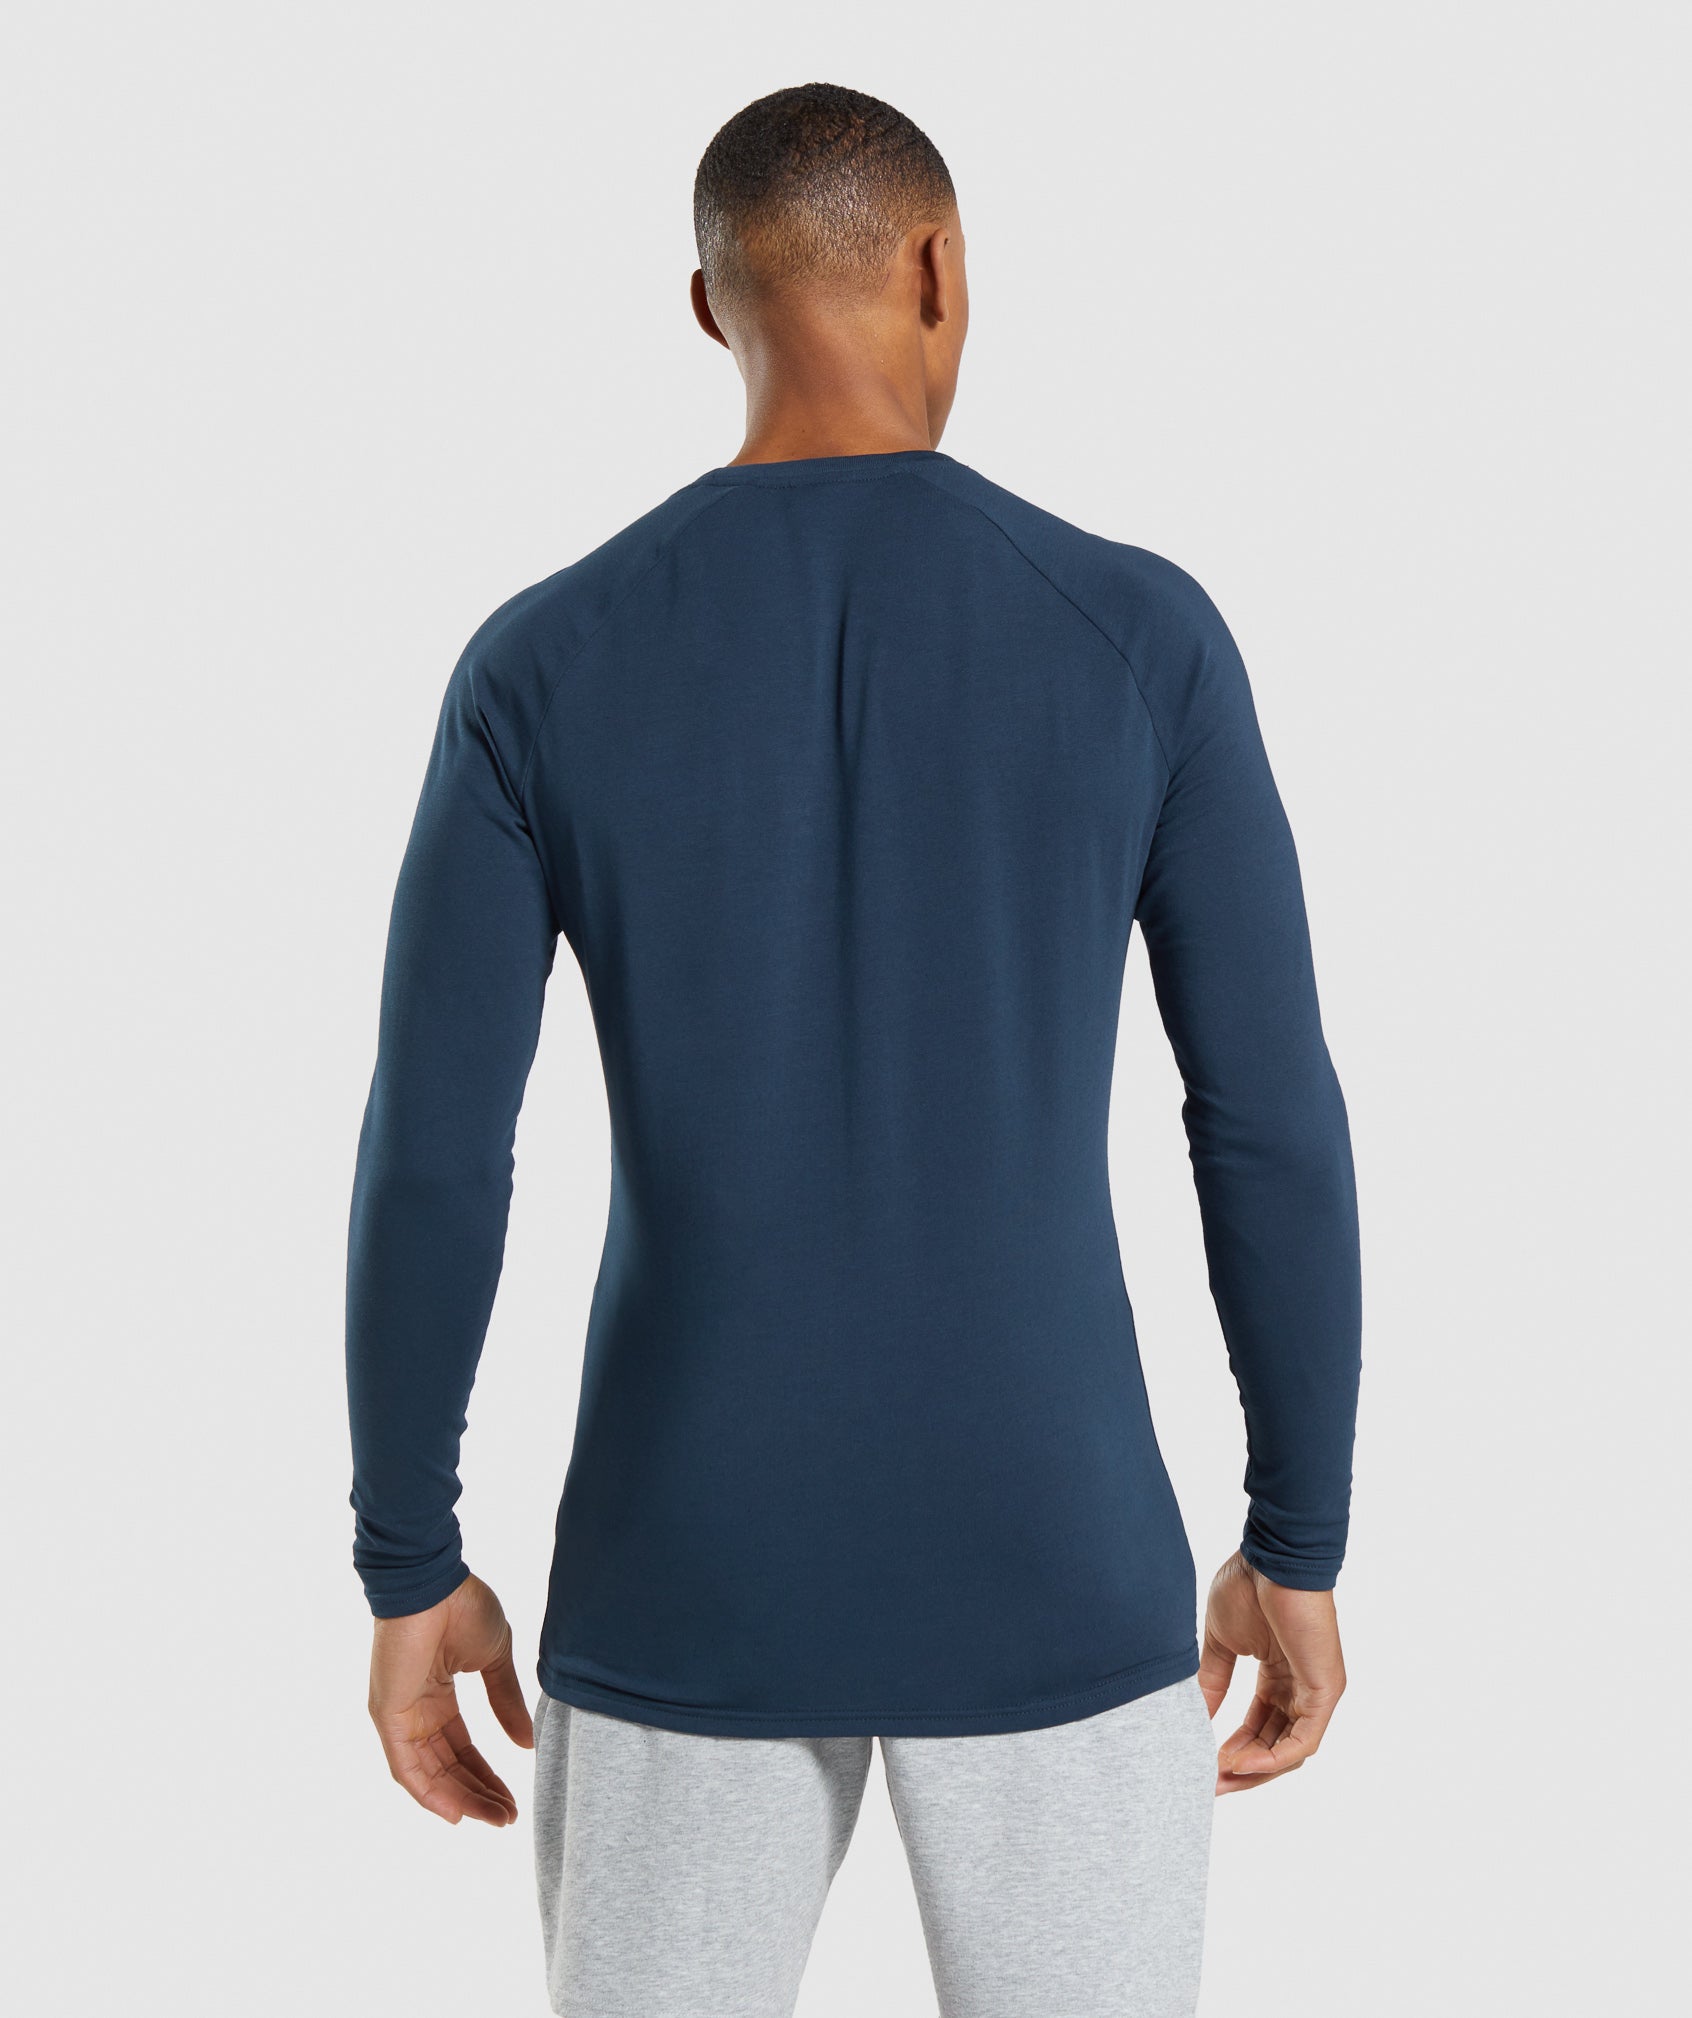 Apollo Long Sleeve T-Shirt in Navy - view 3